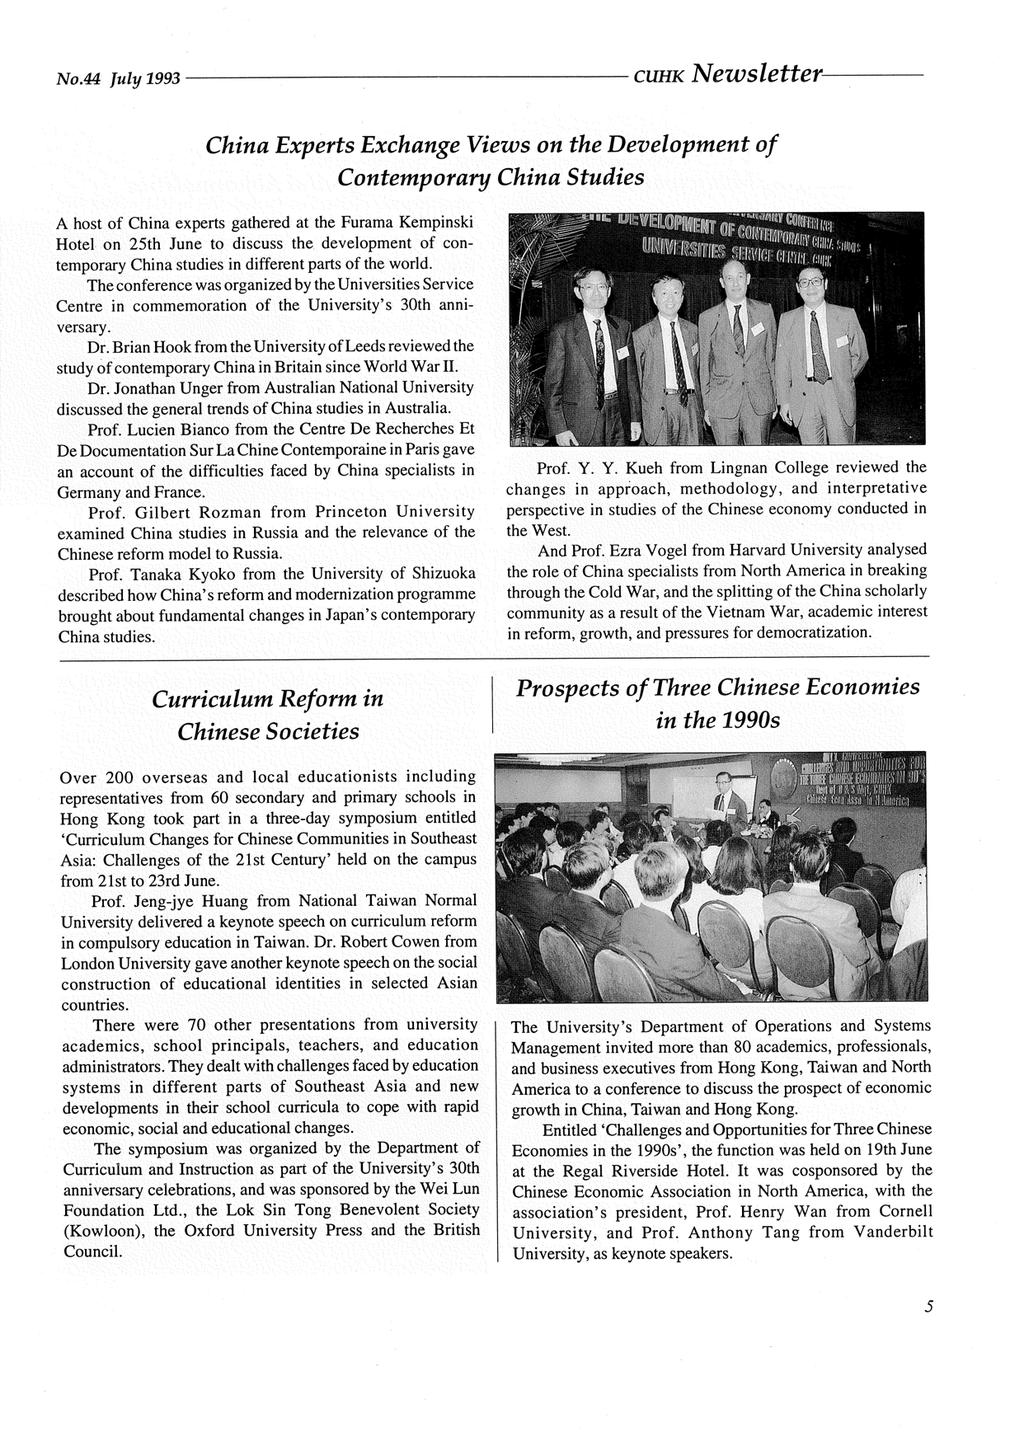 No.44 July 1993 CUHK Newsletter China Experts Exchange Views on the Development of Contemporary China Studies A host of China experts gathered at the Furama Kempinski Hotel on 25th June to discuss